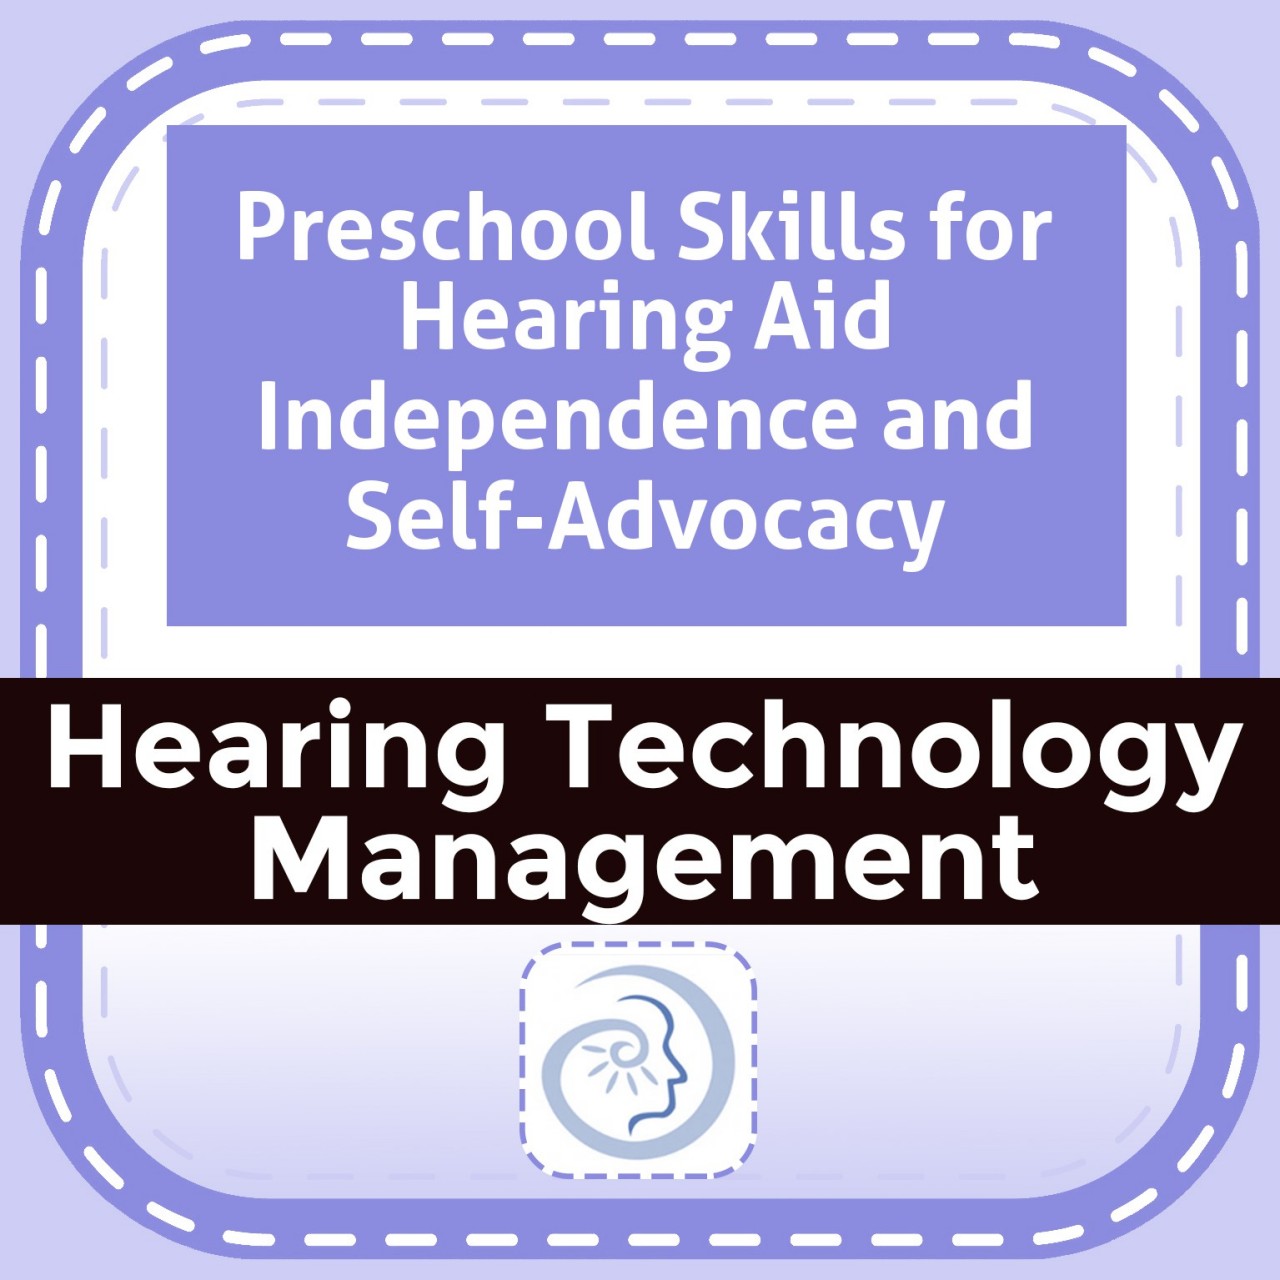 Preschool Skills for Hearing Aid Independence and Self-Advocacy